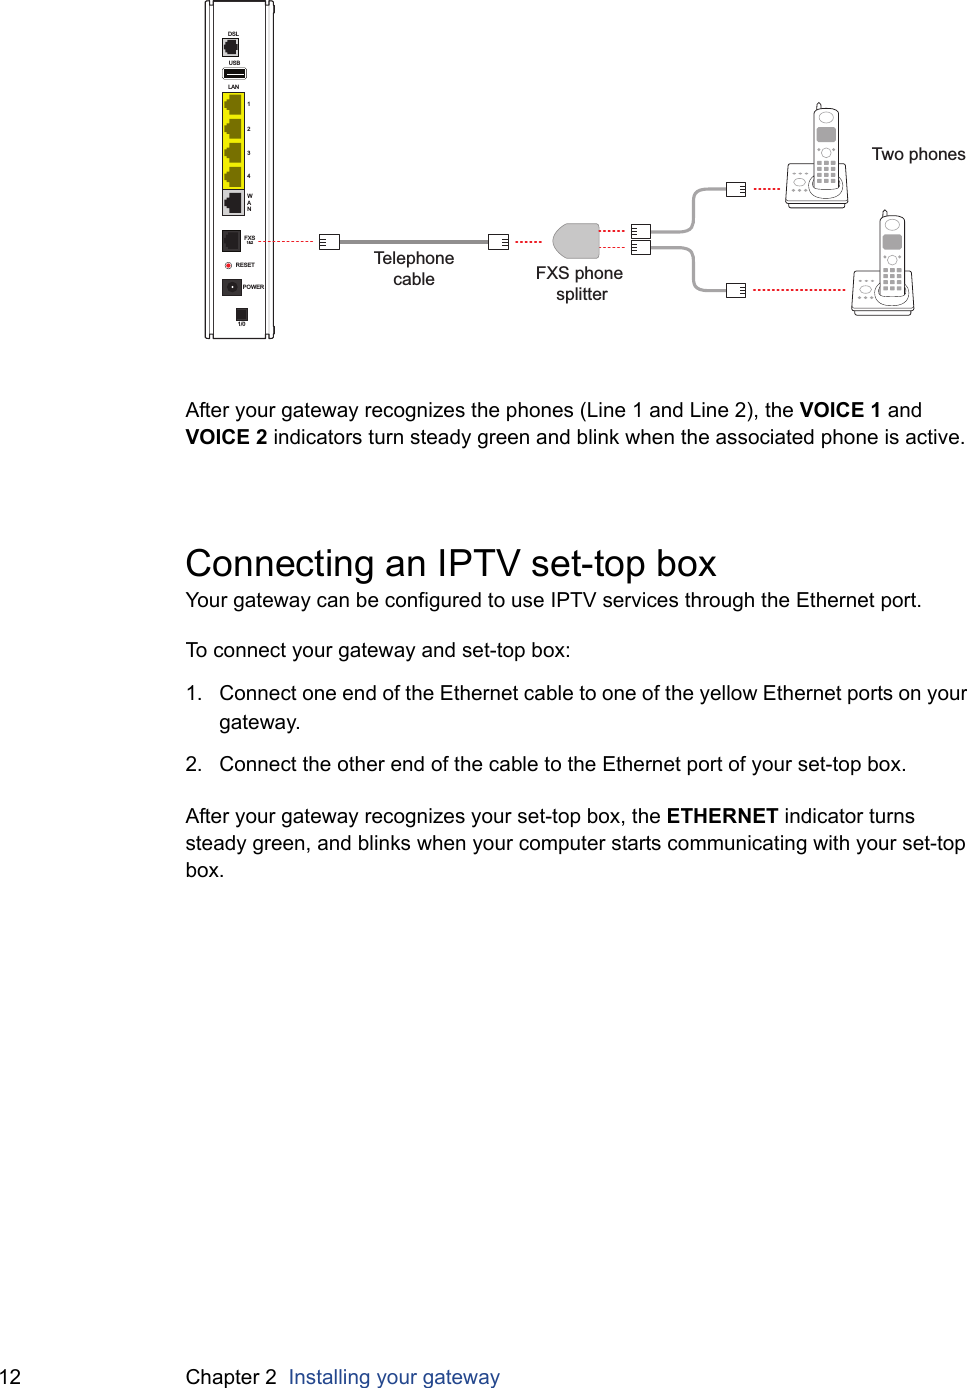 12 Chapter 2  Installing your gatewayAfter your gateway recognizes the phones (Line 1 and Line 2), the VOICE 1 and VOICE 2 indicators turn steady green and blink when the associated phone is active.Connecting an IPTV set-top box Your gateway can be configured to use IPTV services through the Ethernet port.To connect your gateway and set-top box:1. Connect one end of the Ethernet cable to one of the yellow Ethernet ports on your gateway.2. Connect the other end of the cable to the Ethernet port of your set-top box.After your gateway recognizes your set-top box, the ETHERNET indicator turns steady green, and blinks when your computer starts communicating with your set-top box.USBLAN1234WANDSLFXS1&amp;2RESETPOWER1/0Telephonecable FXS phone splitterTwo phones